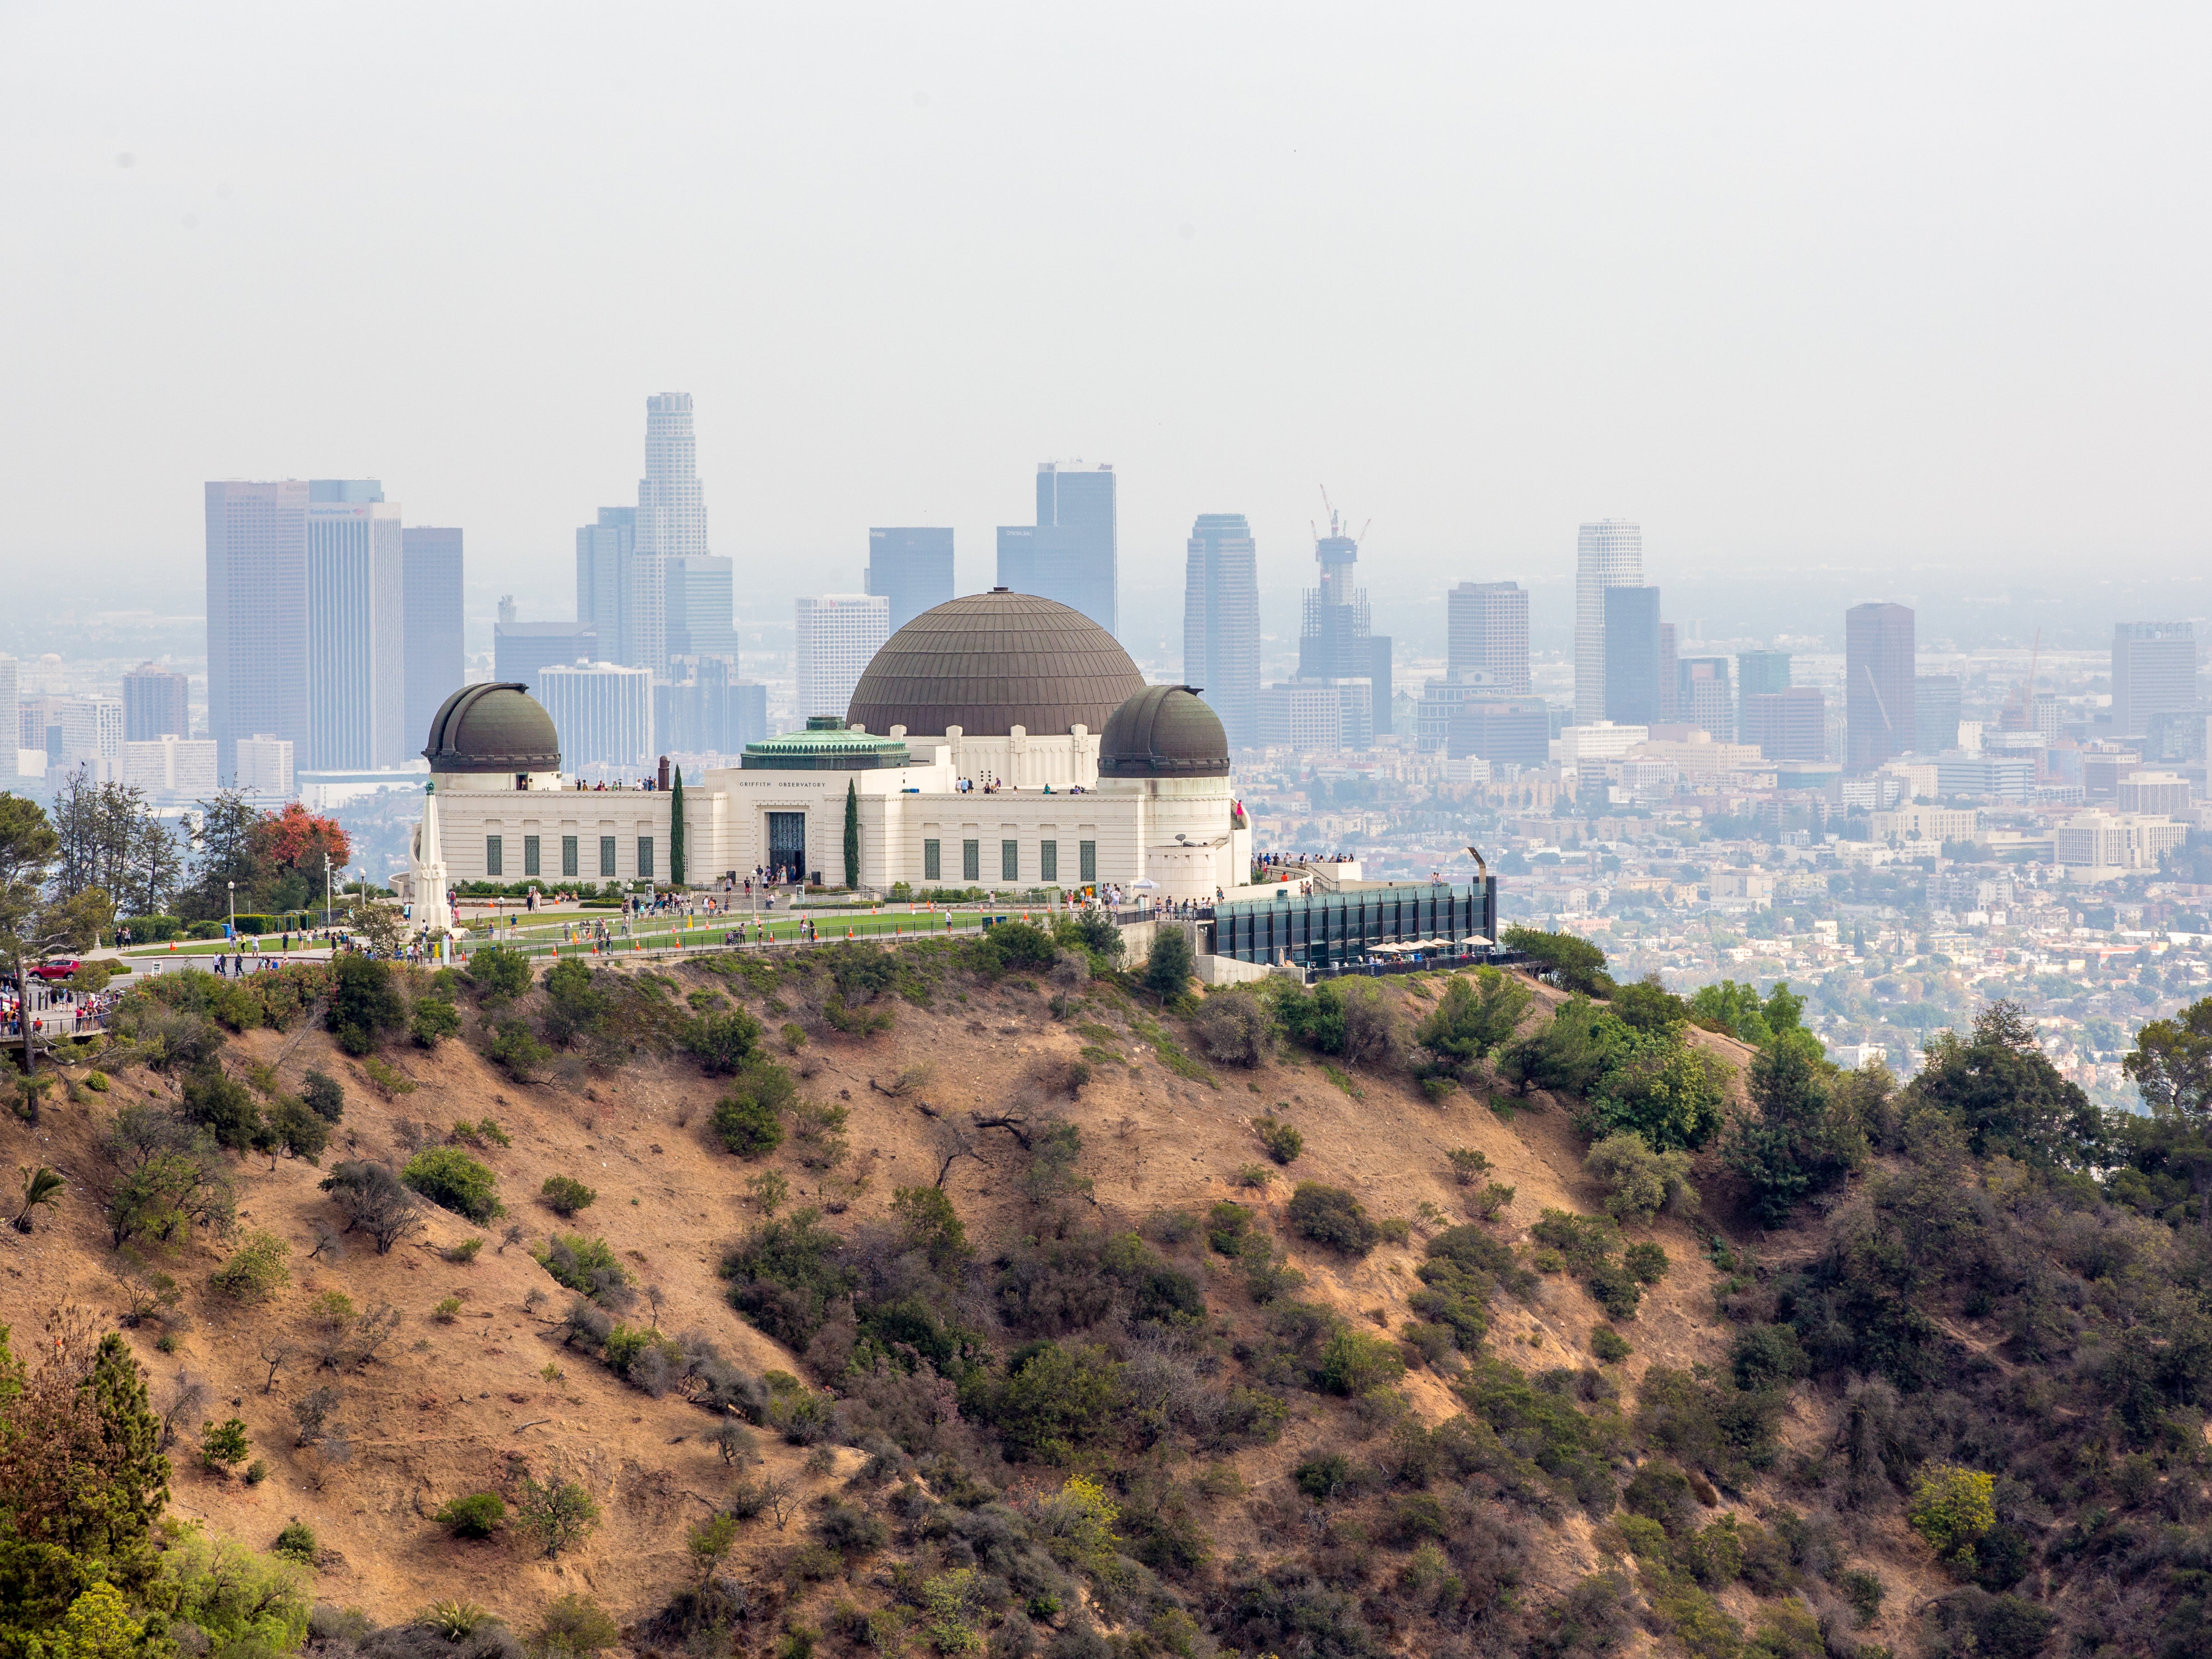 The Griffith Observatory is a steep climb on a bike but worth it for the views